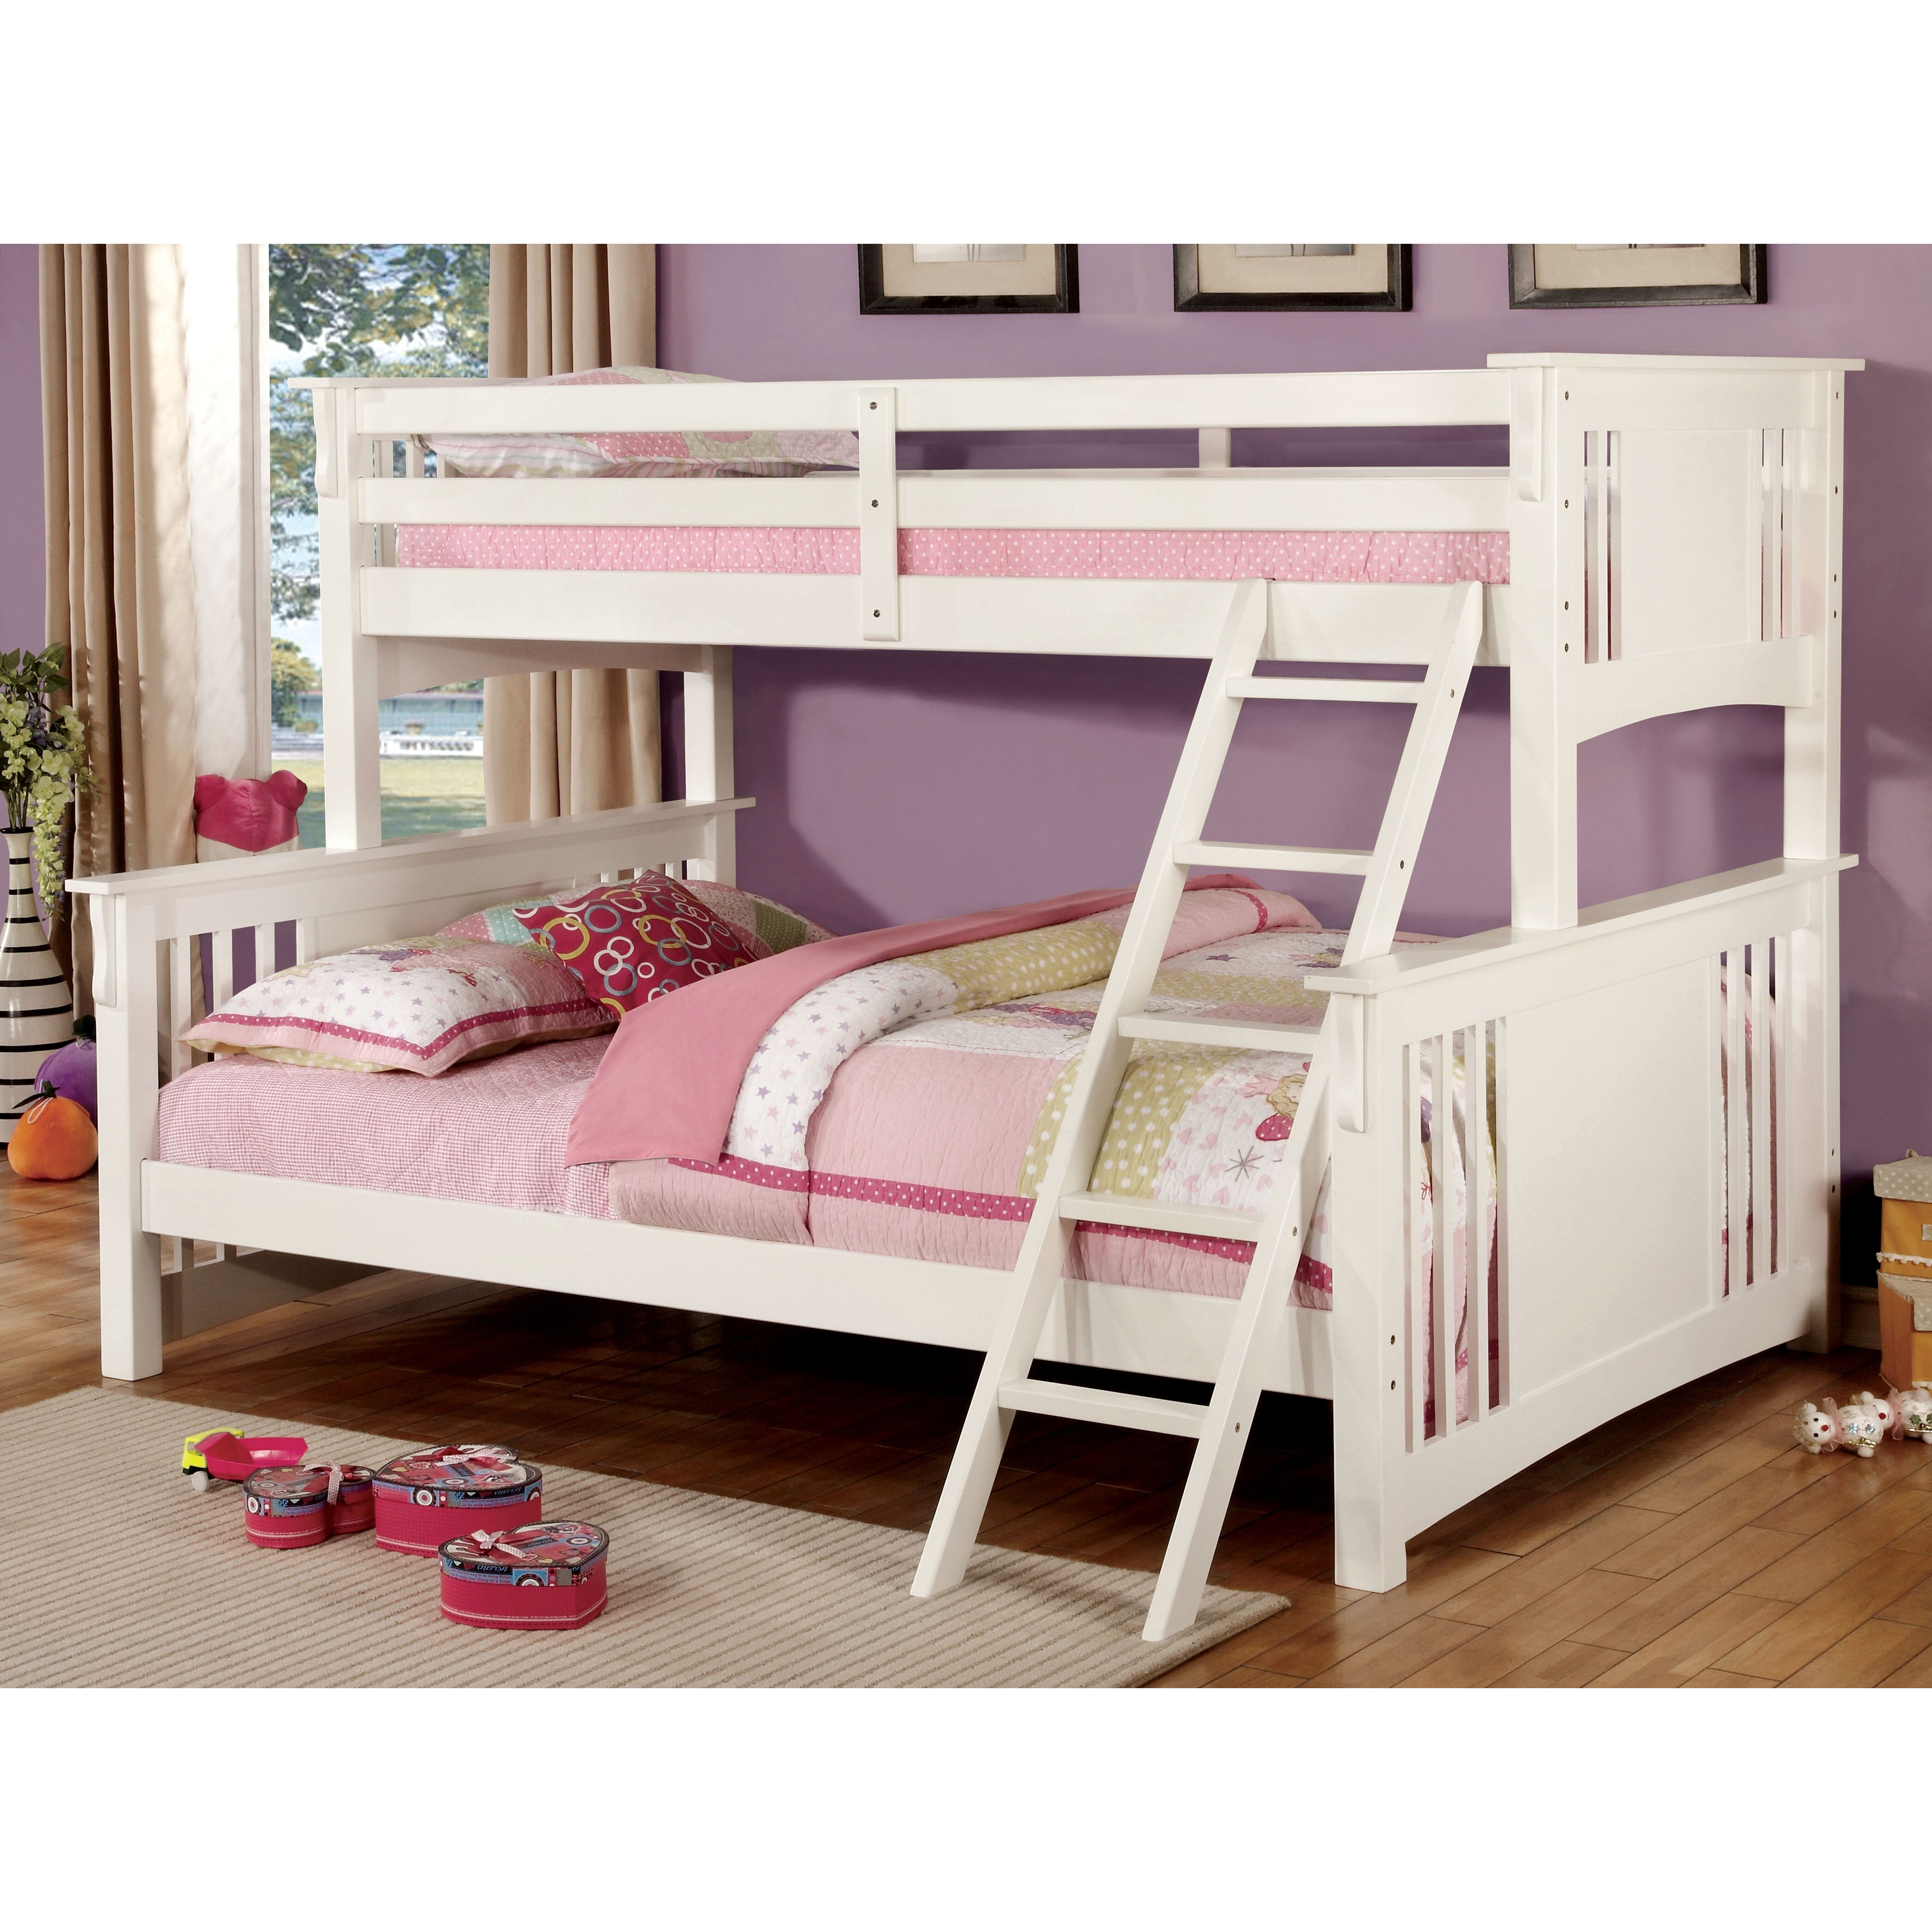 Futon Bunk Bed With Stairs. cheap bunk beds bunk beds for adults bunk 